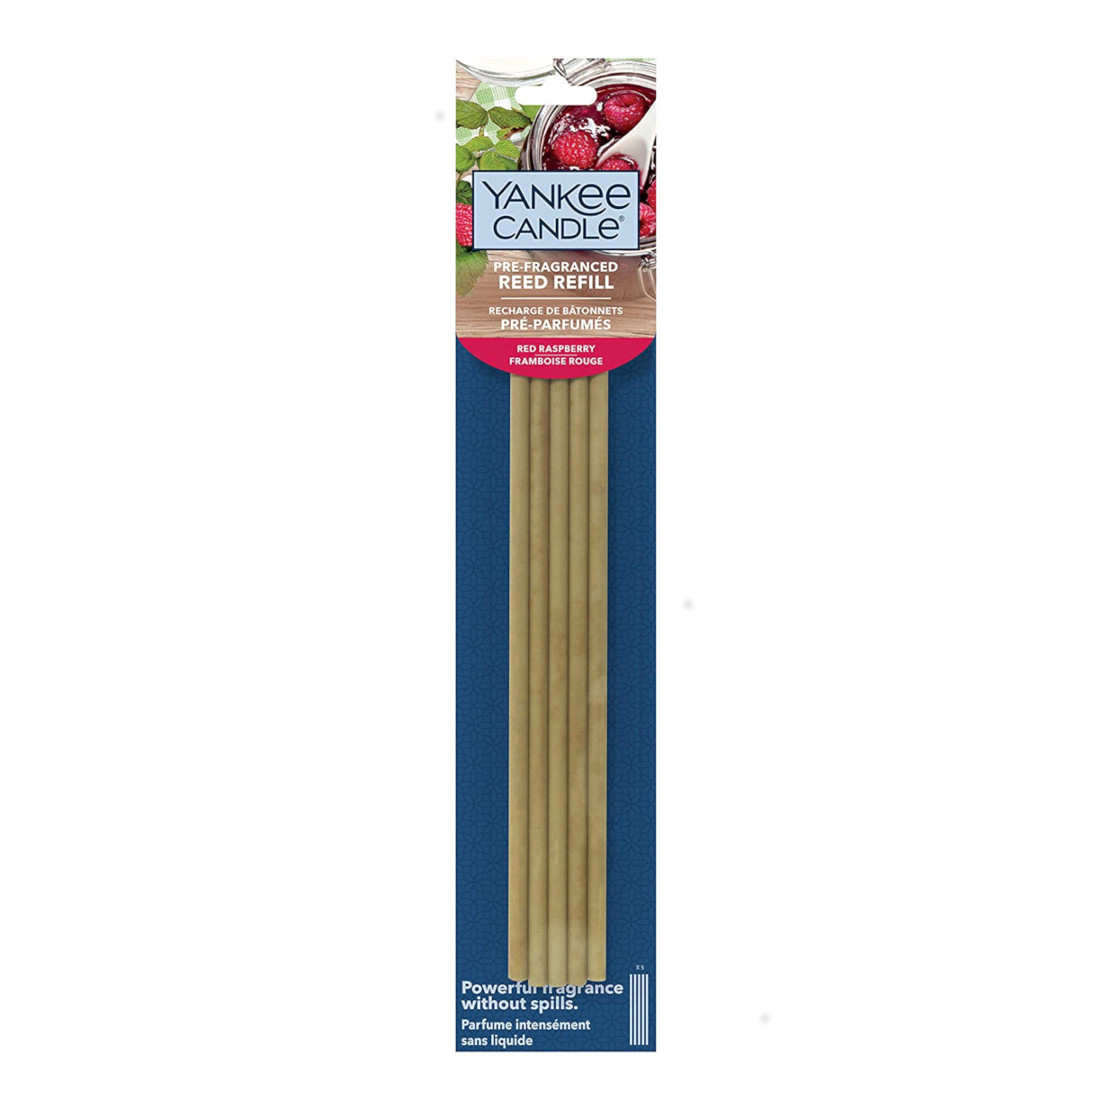 Yankee Candle Red Raspberry Pre-Fragranced Reed Diffuser Refills